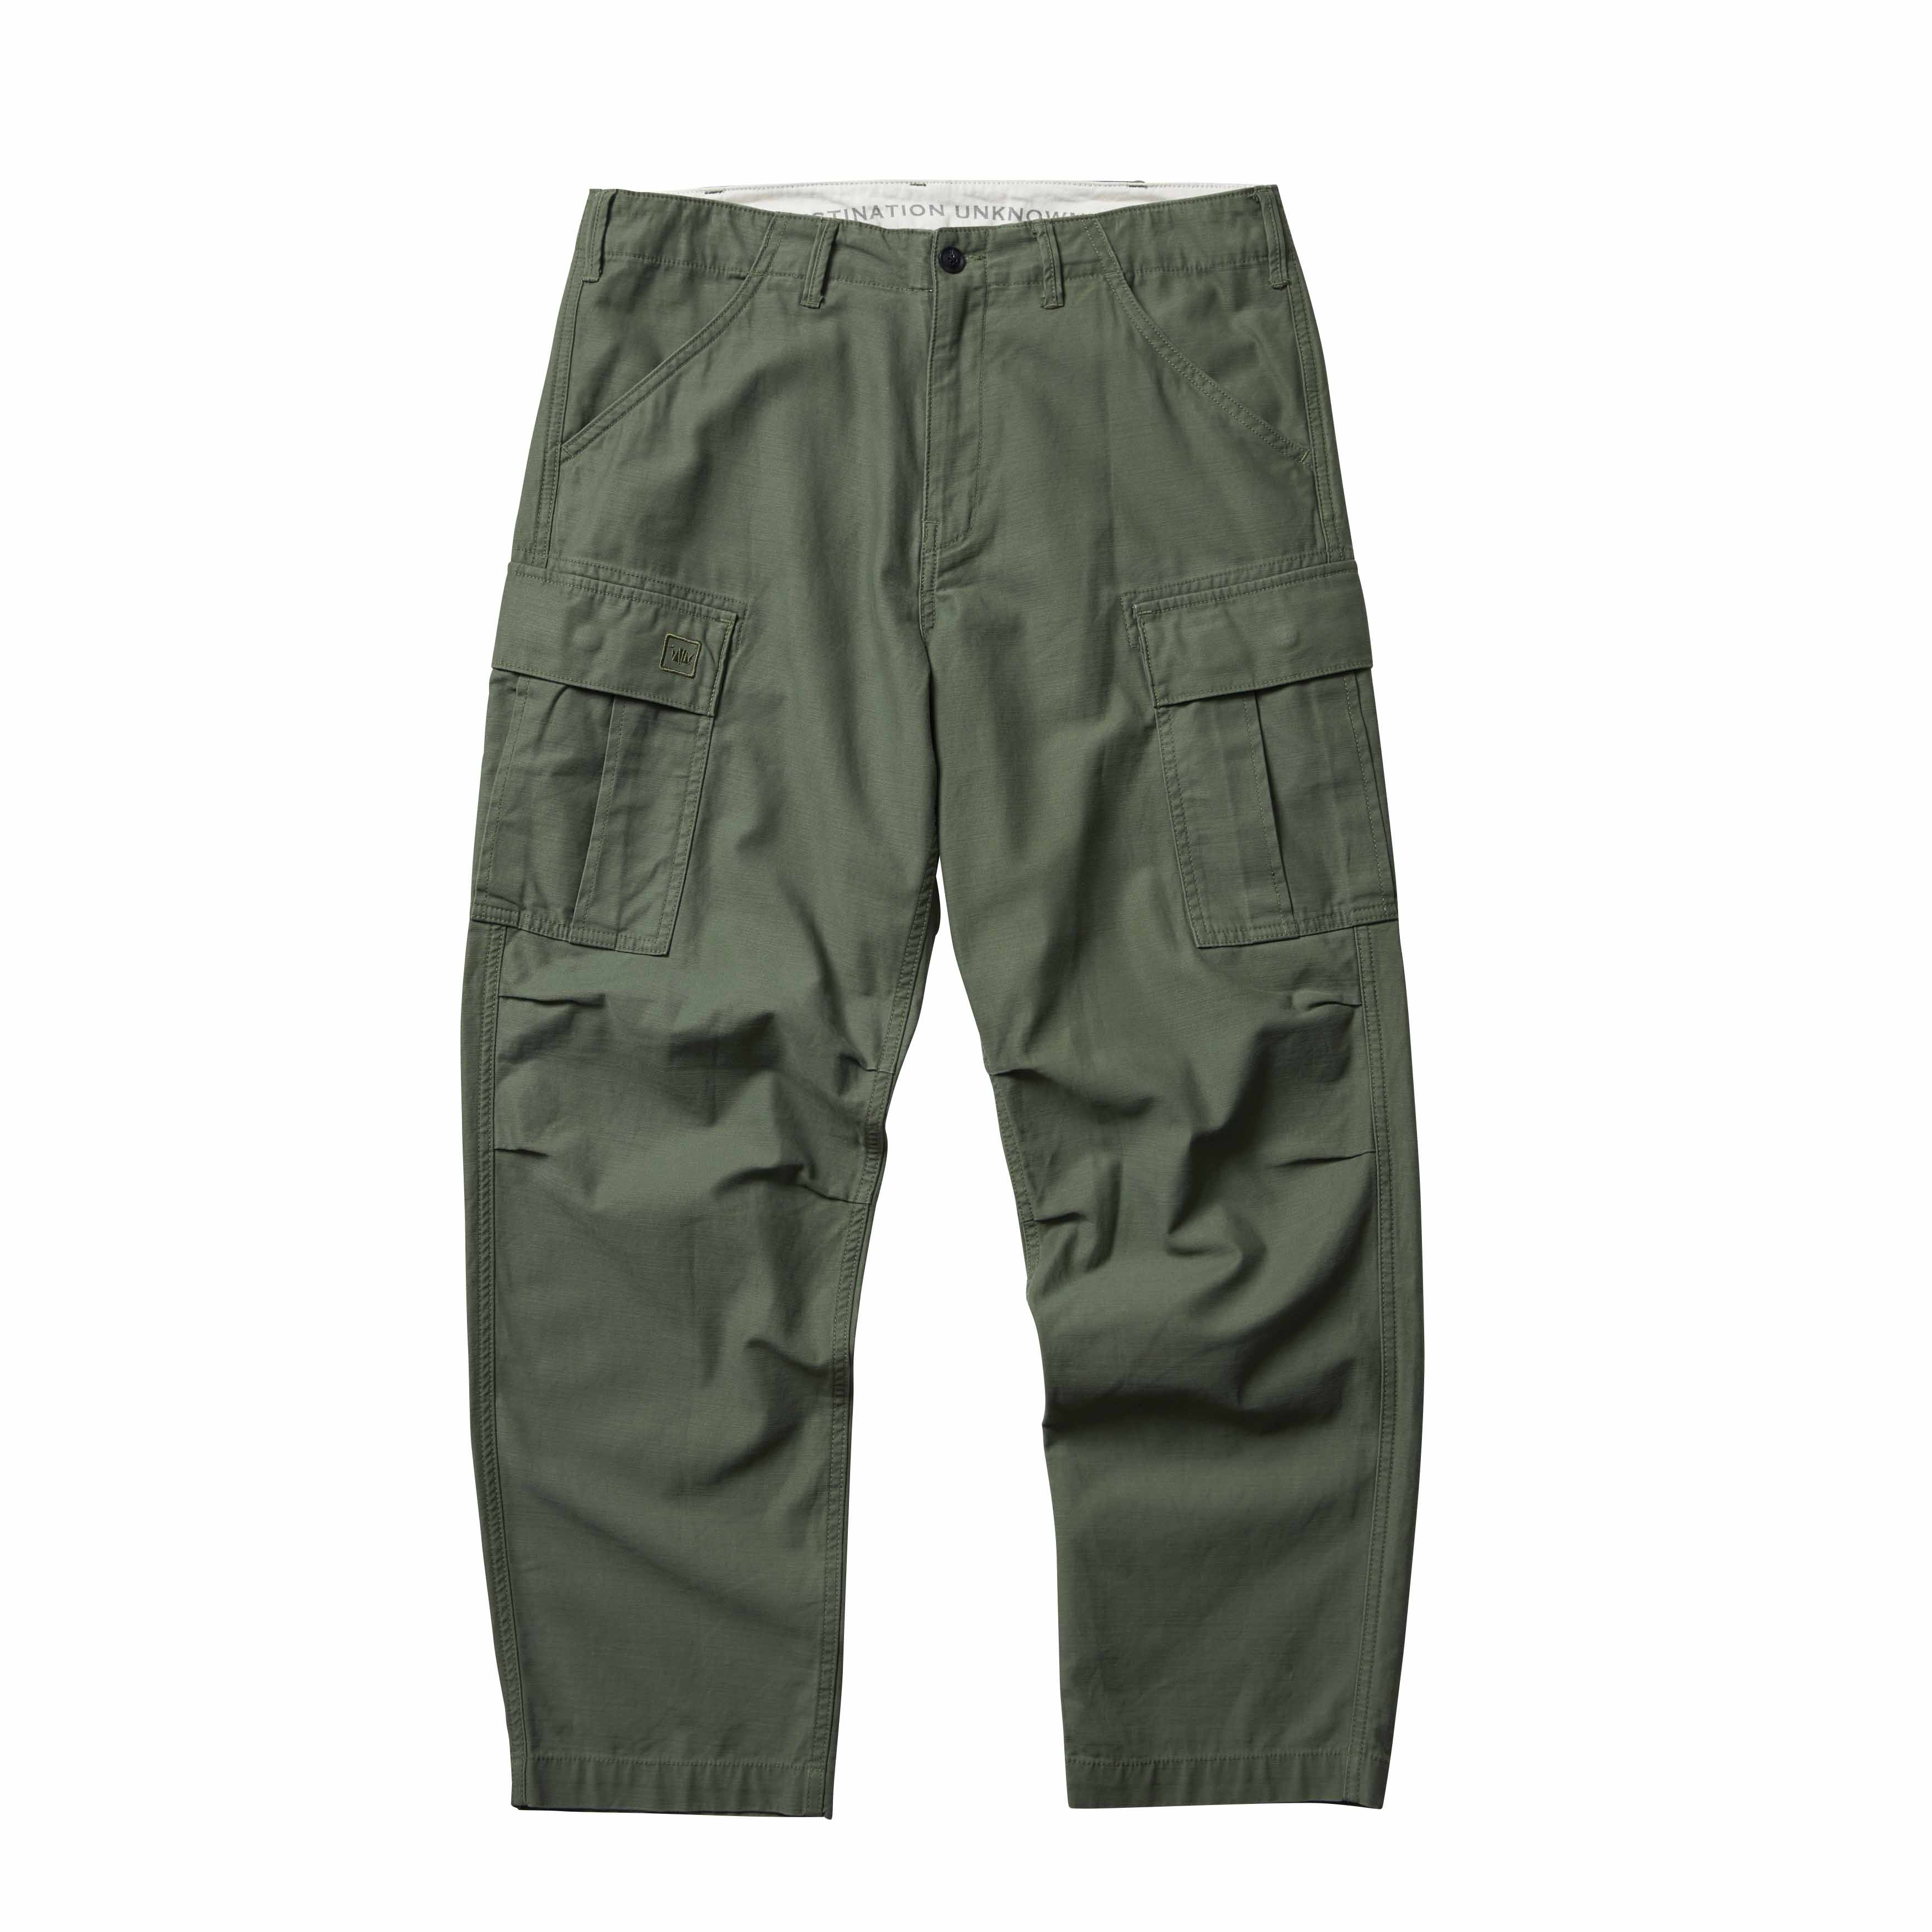 Liberaiders  6 POCKETS ARMY PANTS  OLIVE